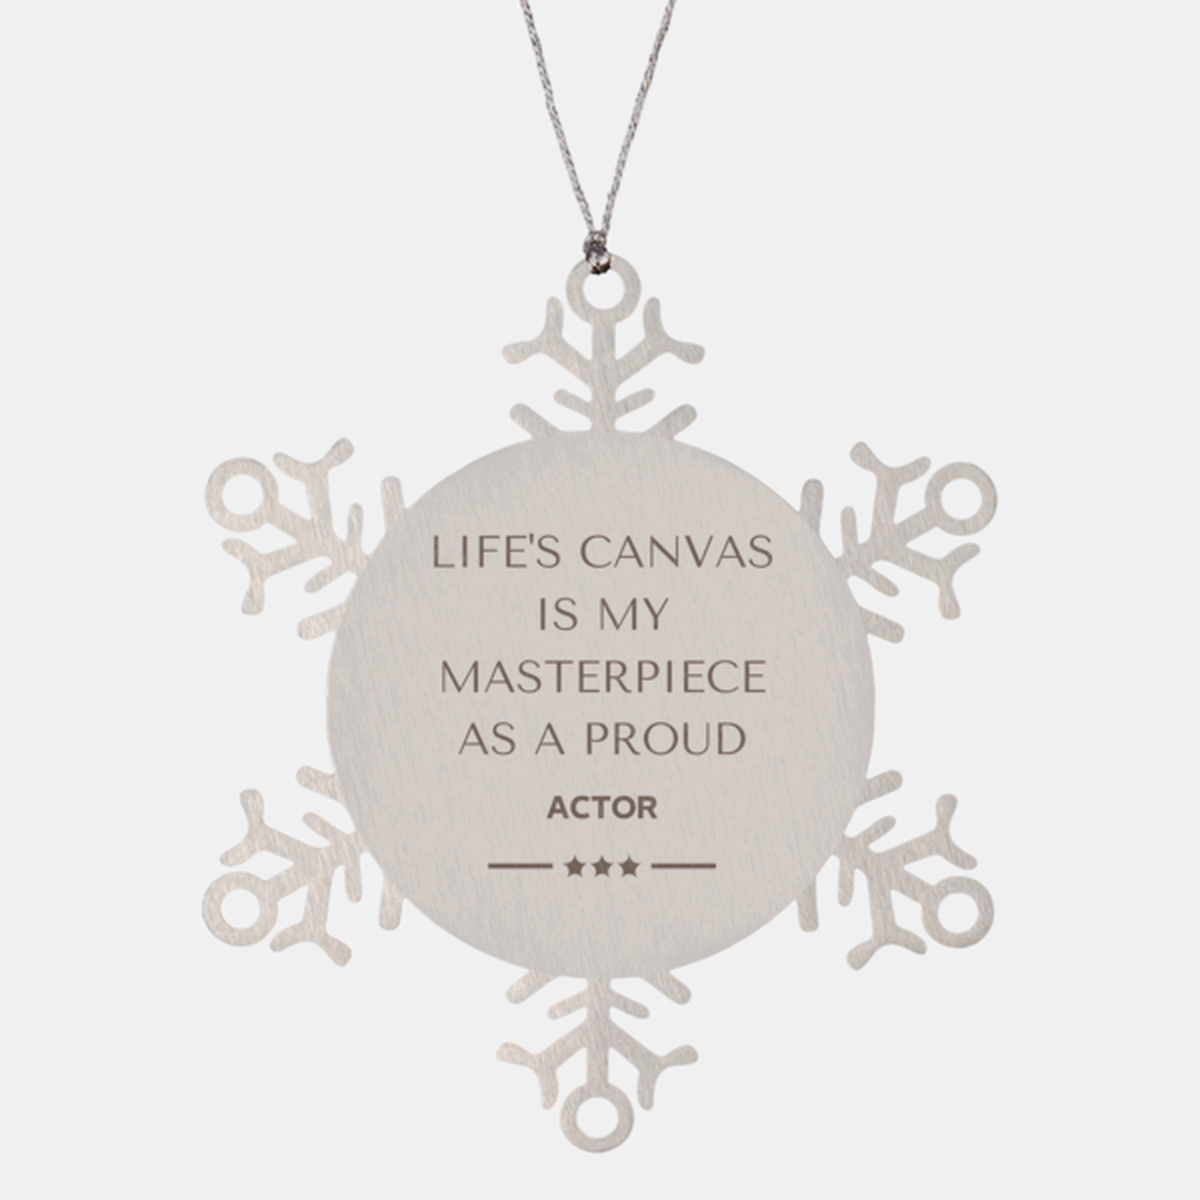 Proud Actor Gifts, Life's canvas is my masterpiece, Epic Birthday Christmas Unique Snowflake Ornament For Actor, Coworkers, Men, Women, Friends